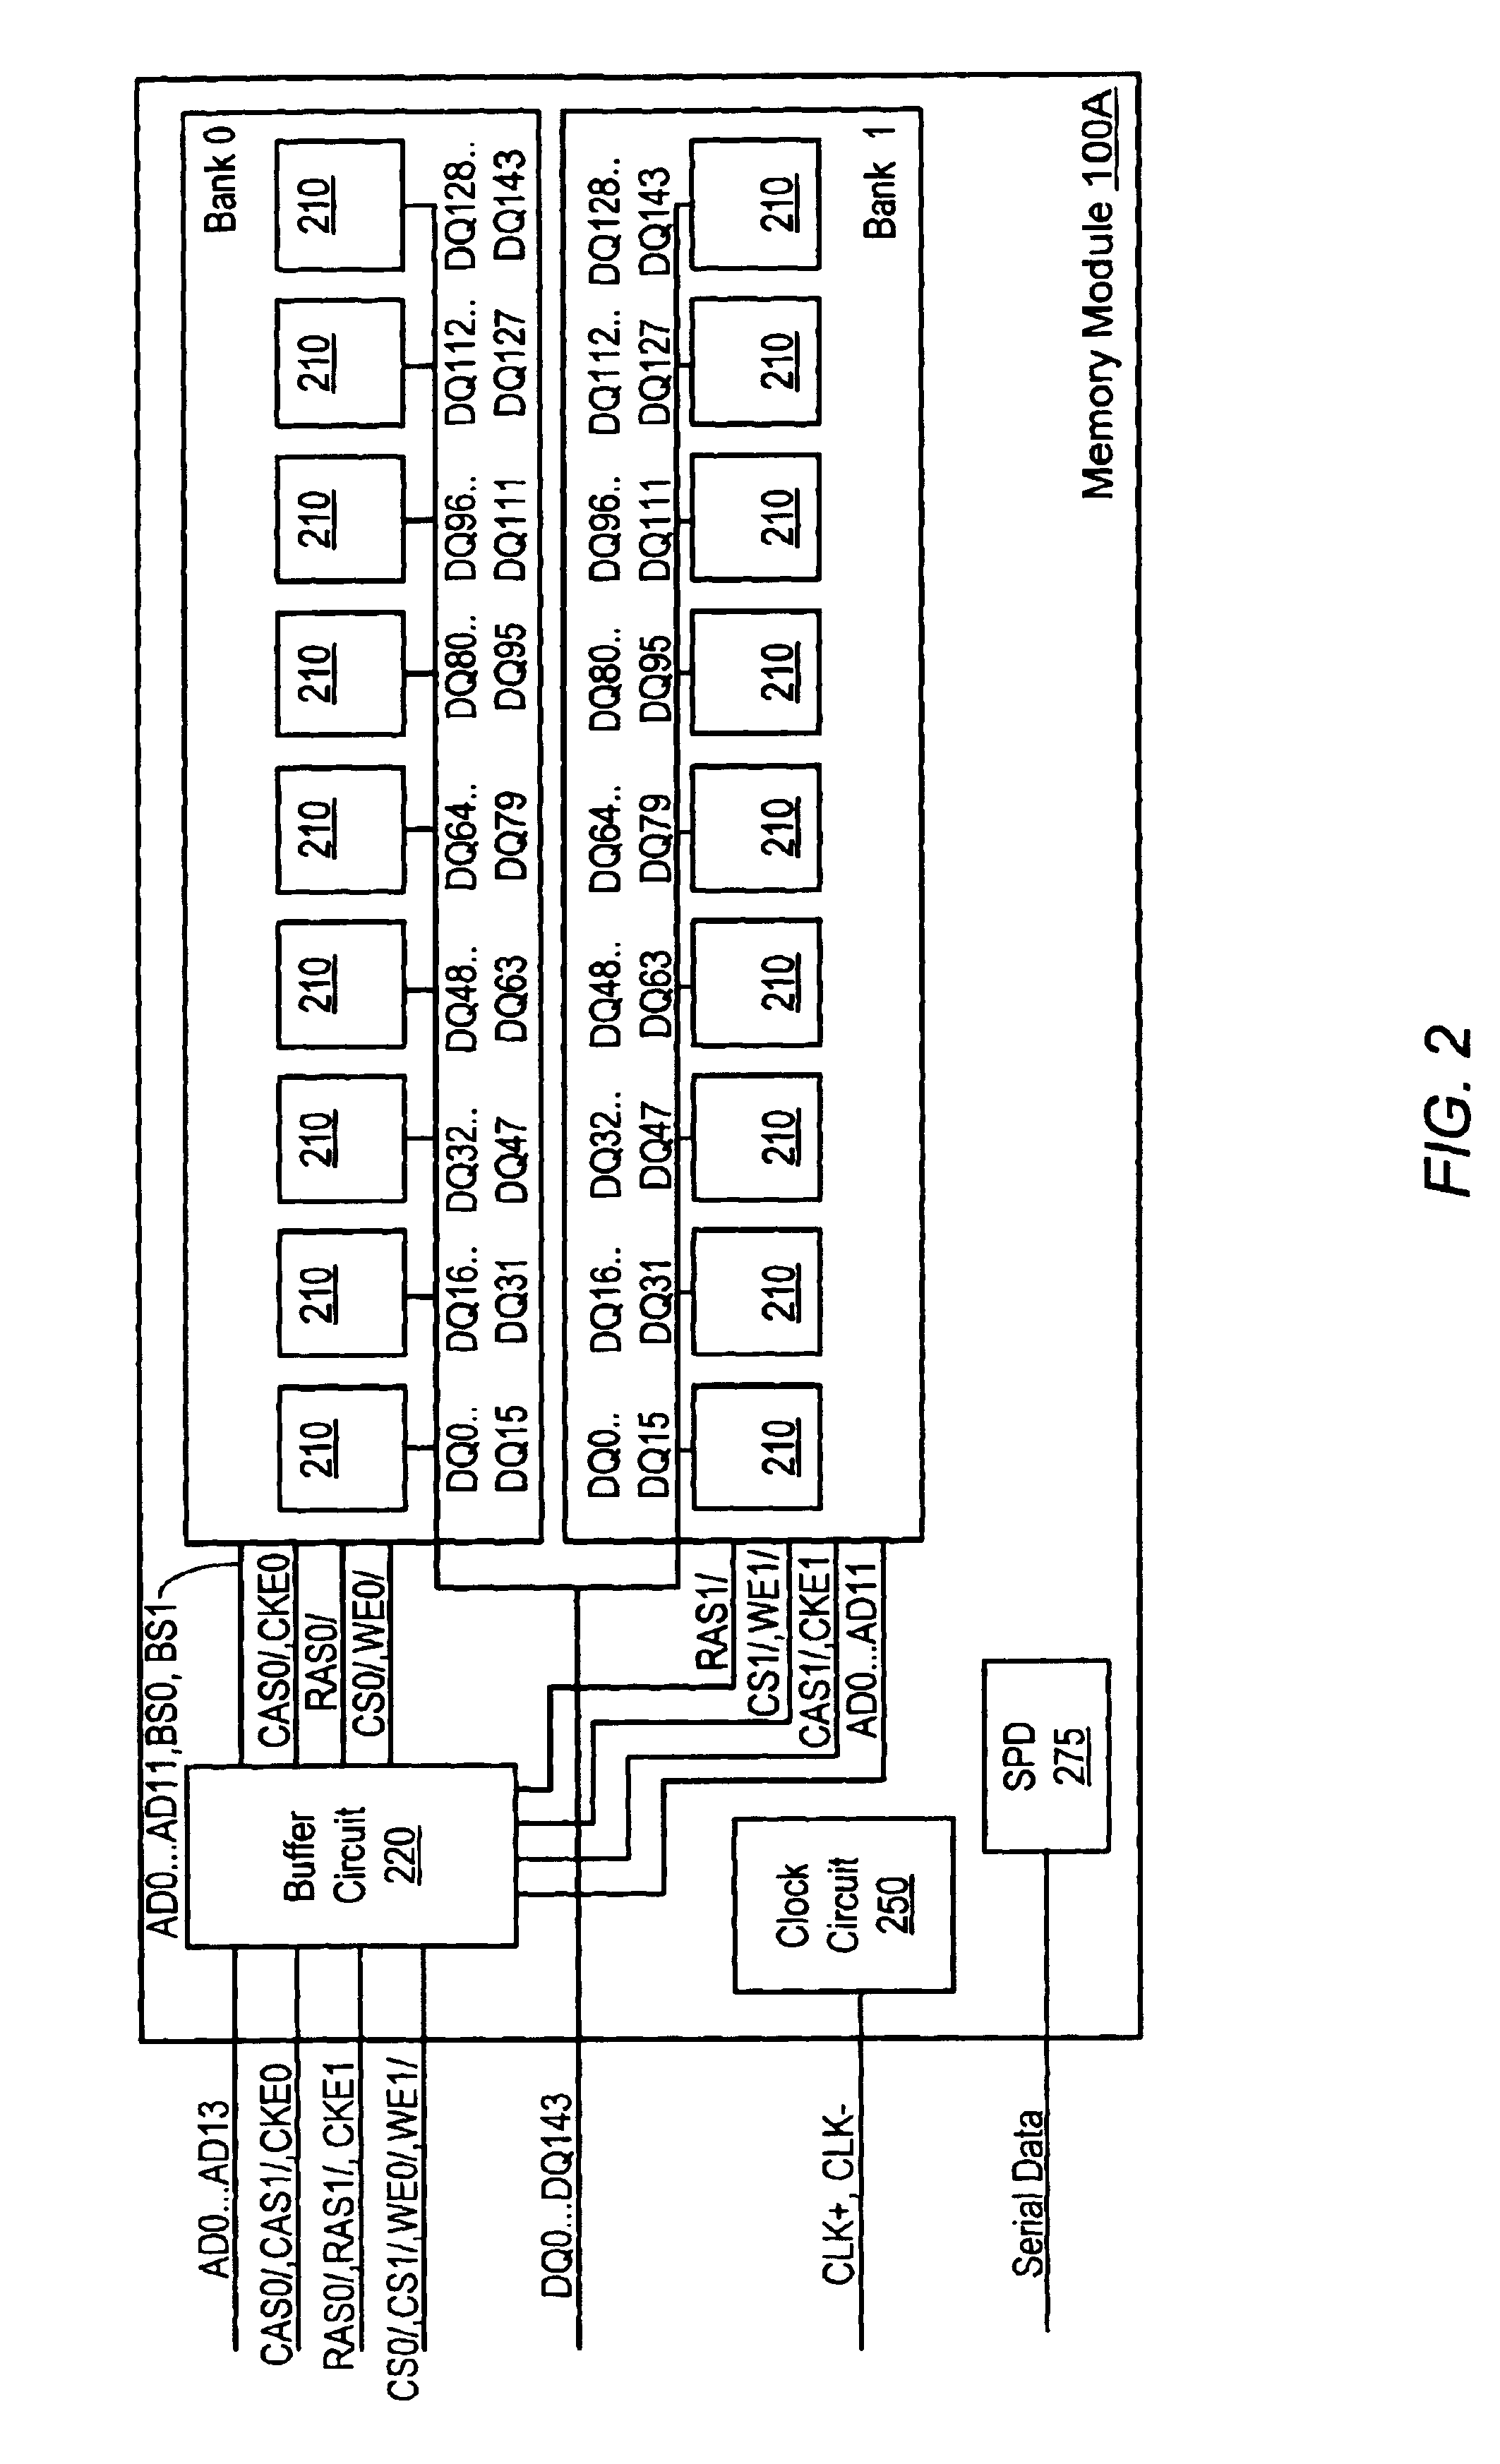 Single rank memory module for use in a two-rank memory module system